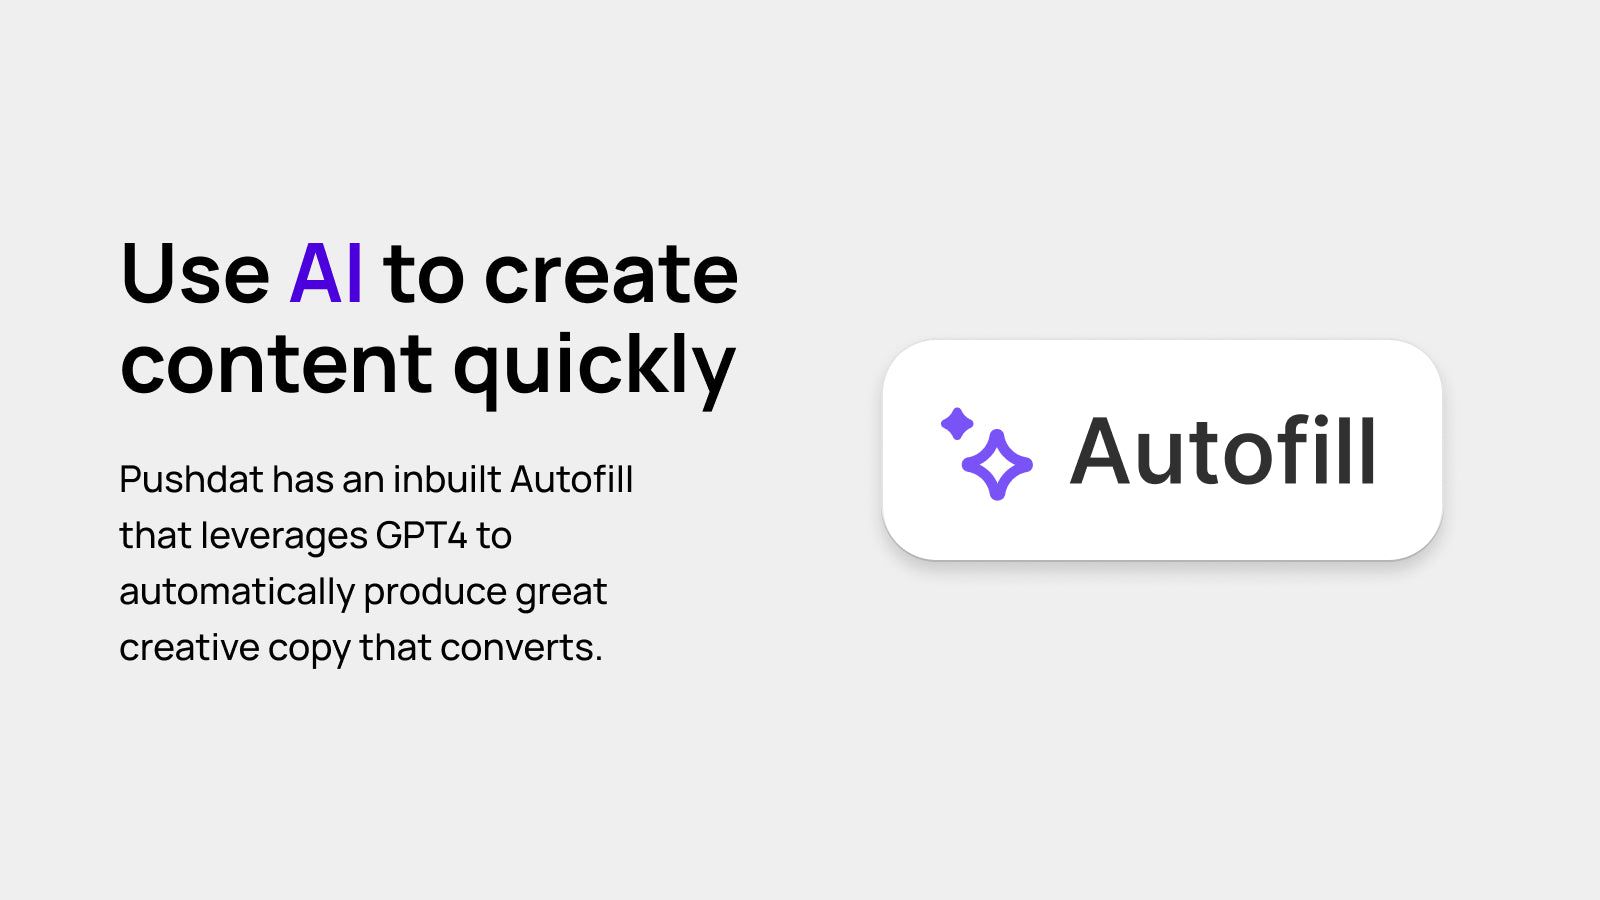 Use AI to create content quickly with AI Autofill.